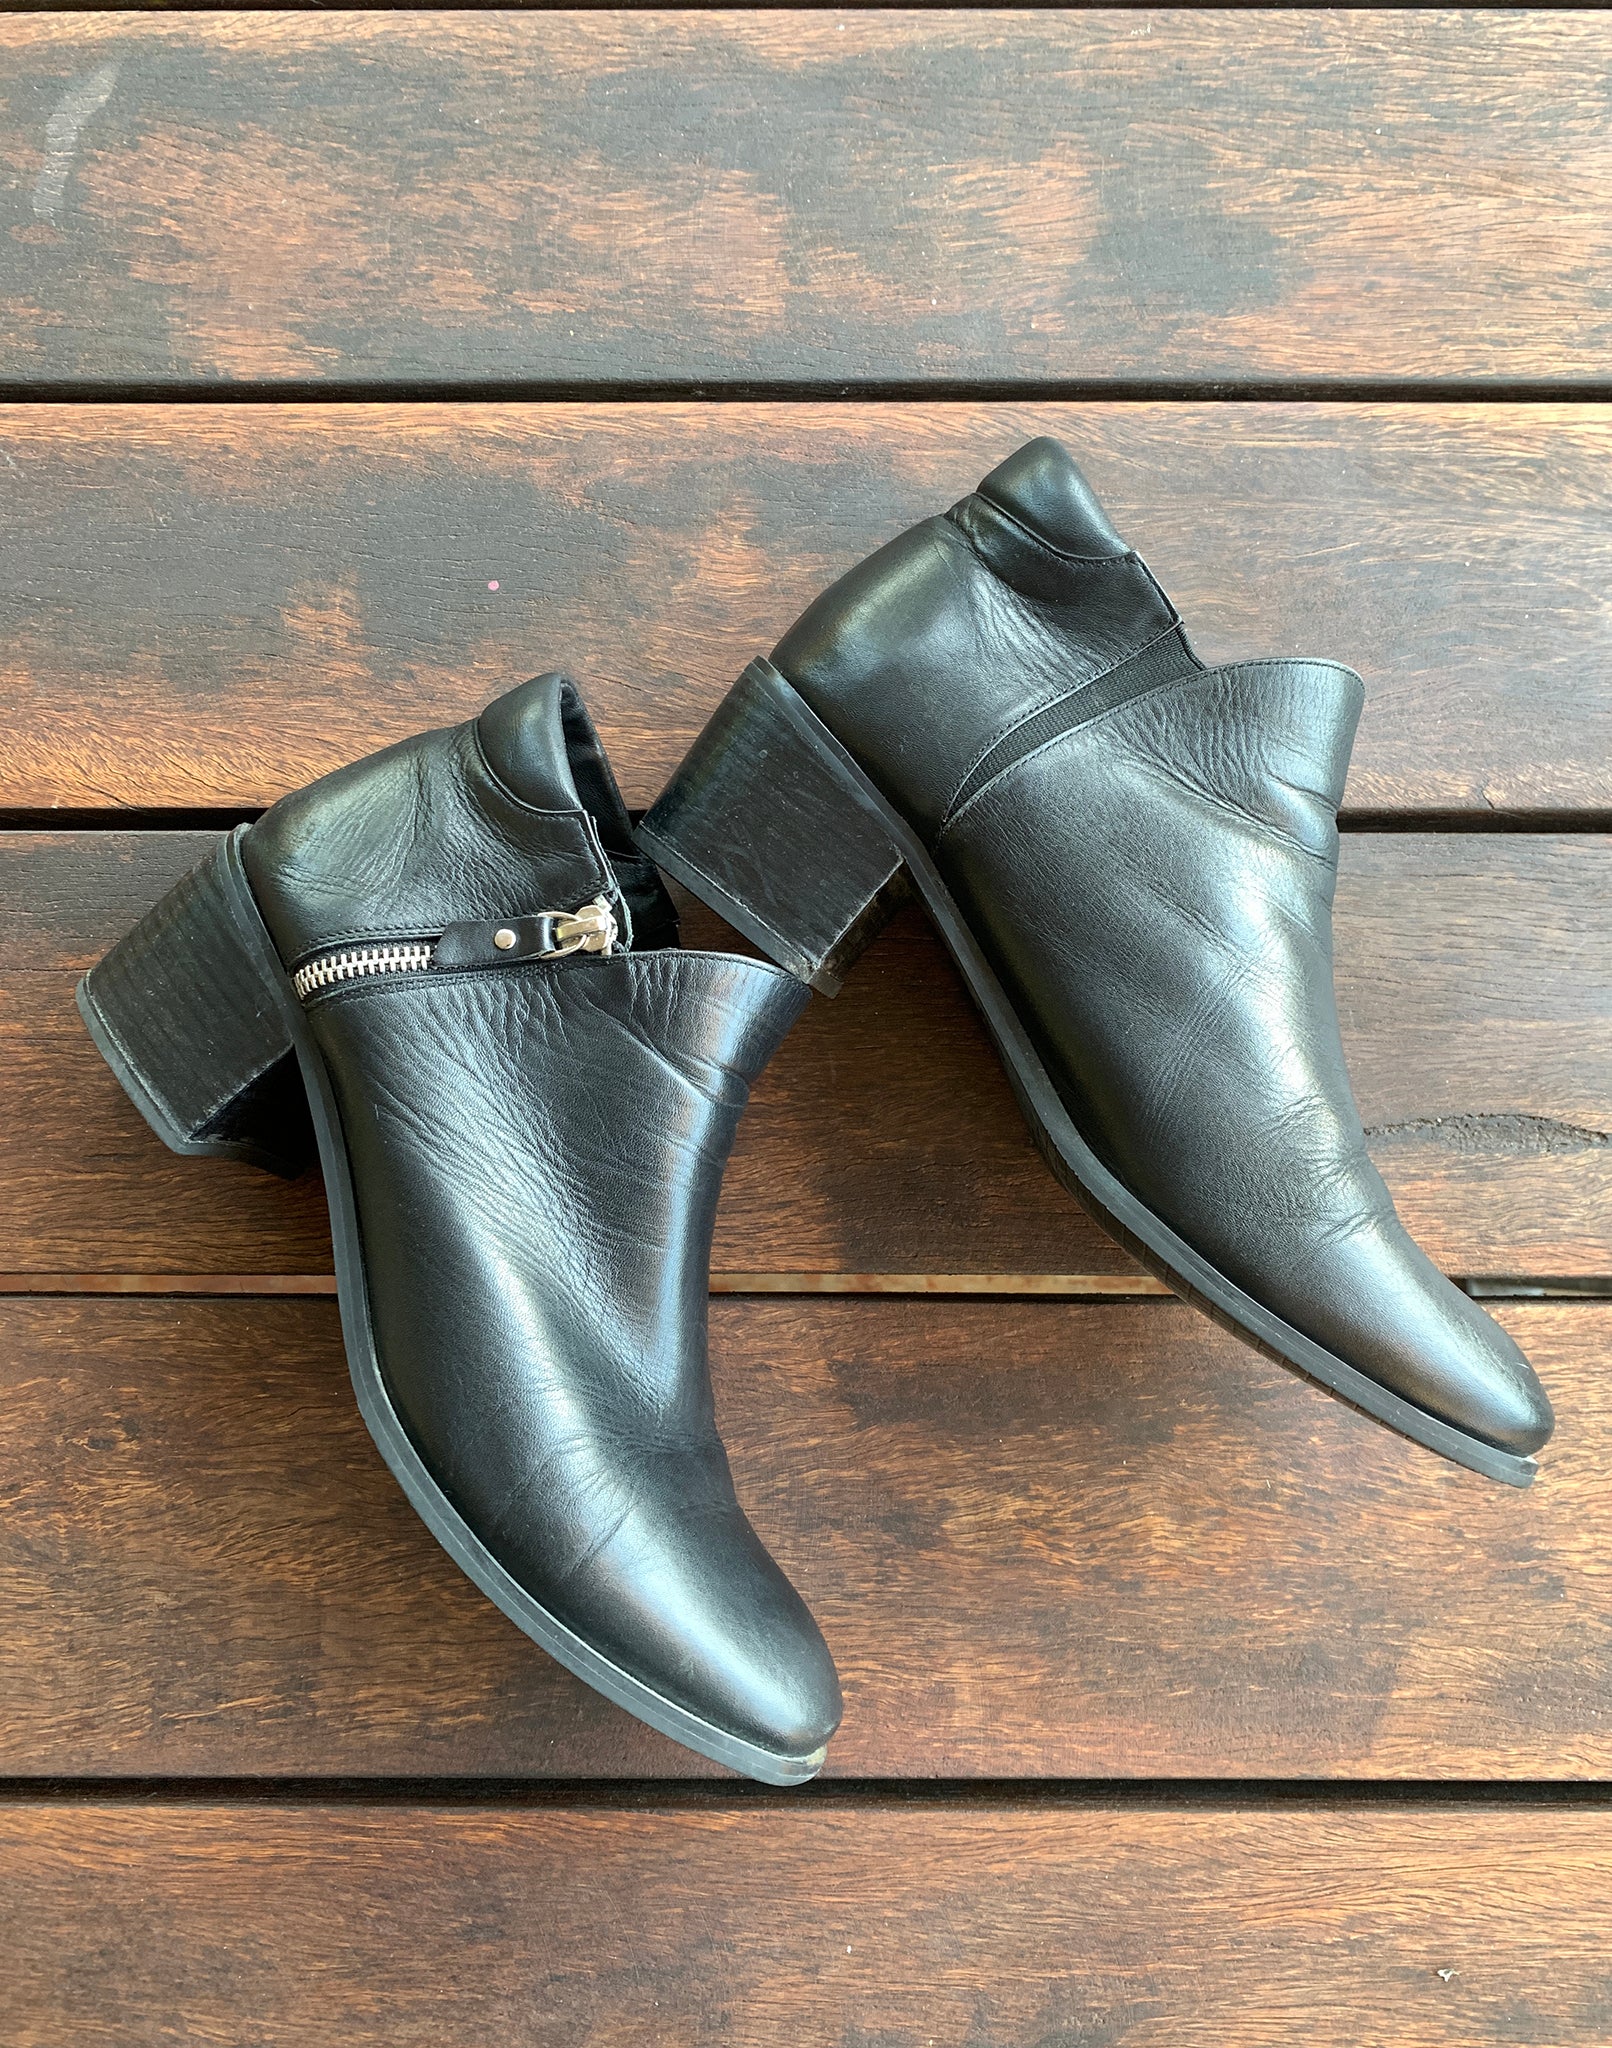 Black Leather Ankle Zip Boots Jo Mercer - Size 11